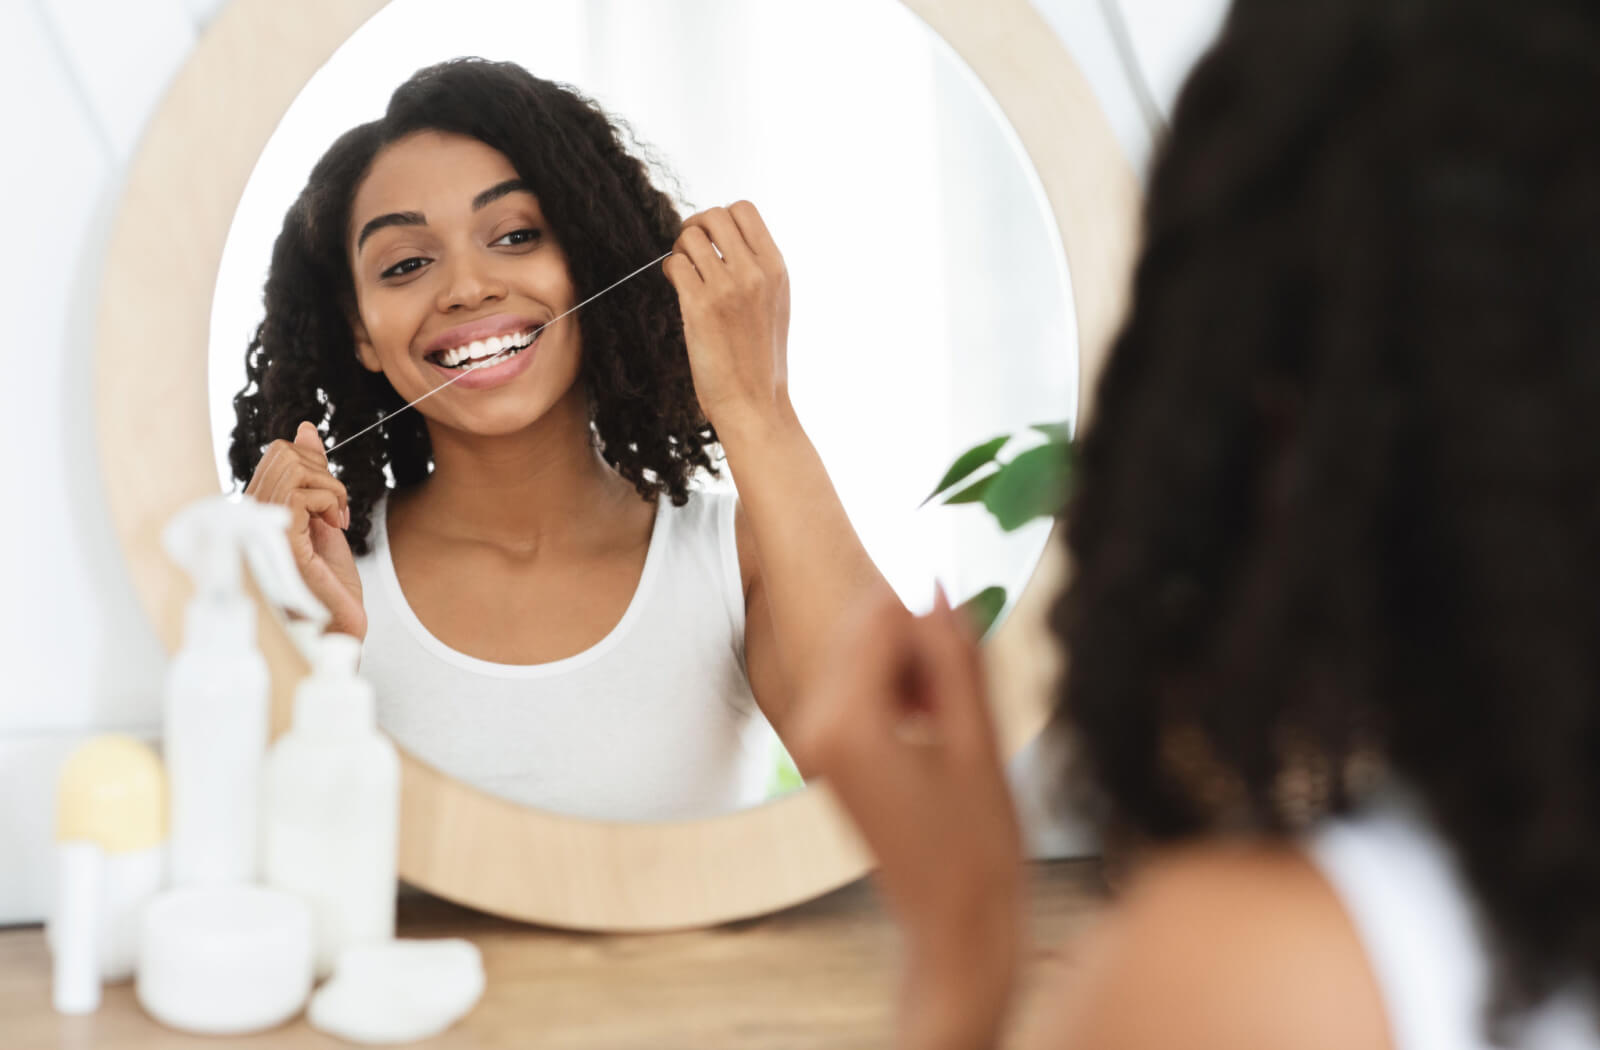 A young woman in the mirror holding dental floss on her hands and flossing her teeth.